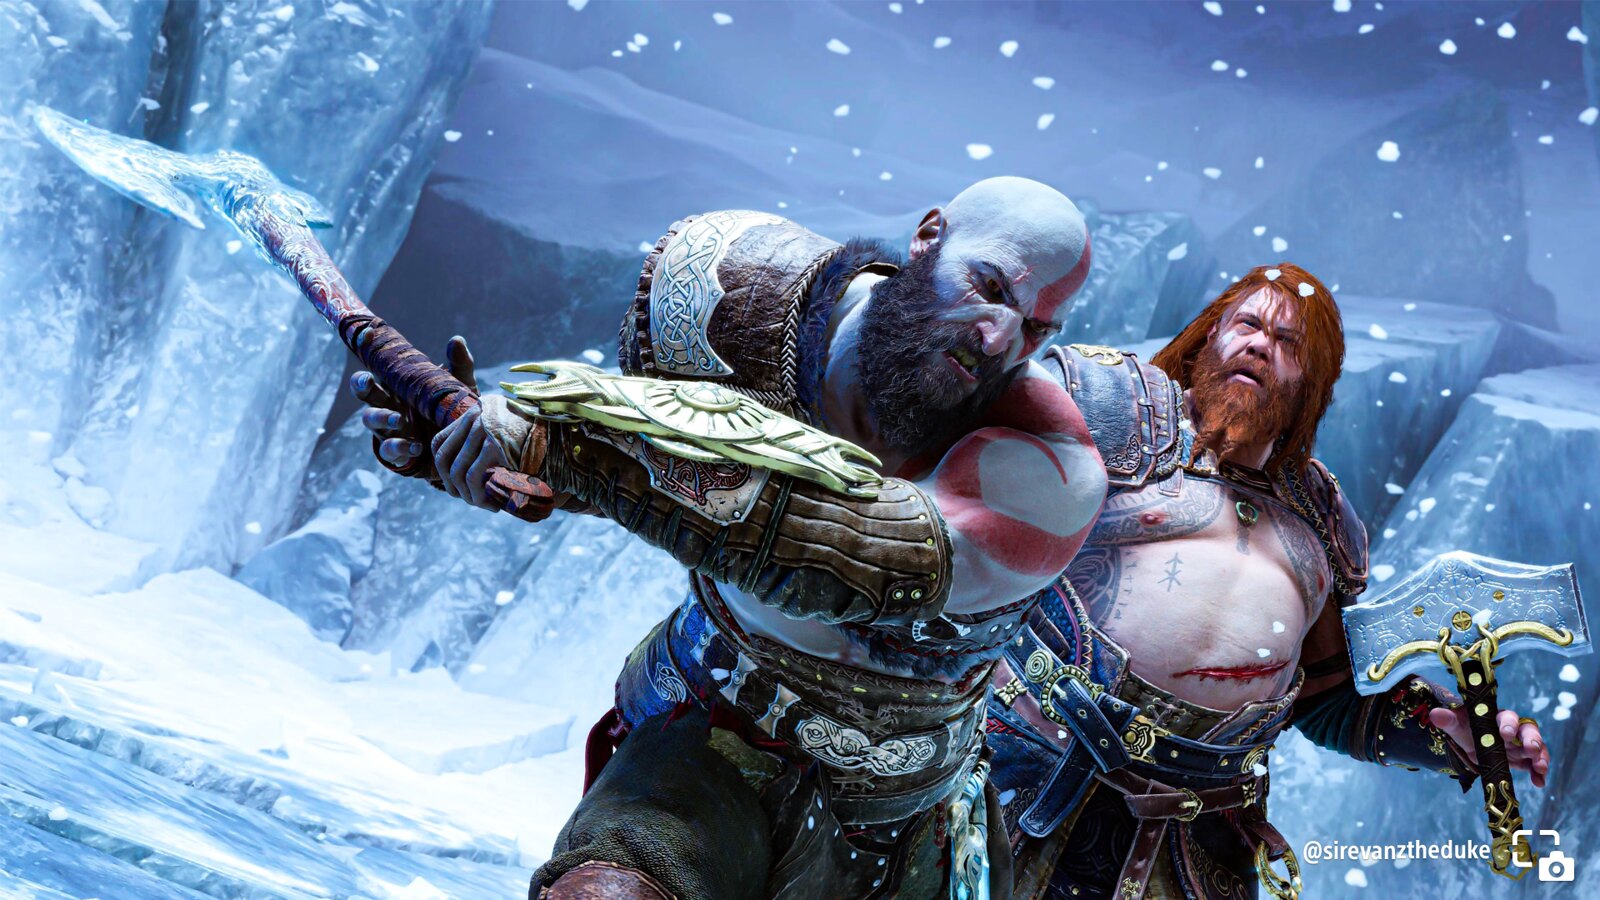 Brutal Kratos, fabulous locations and colorful shots: the PlayStation blog published the best pictures taken by gamers in God of War Ragnarok-4